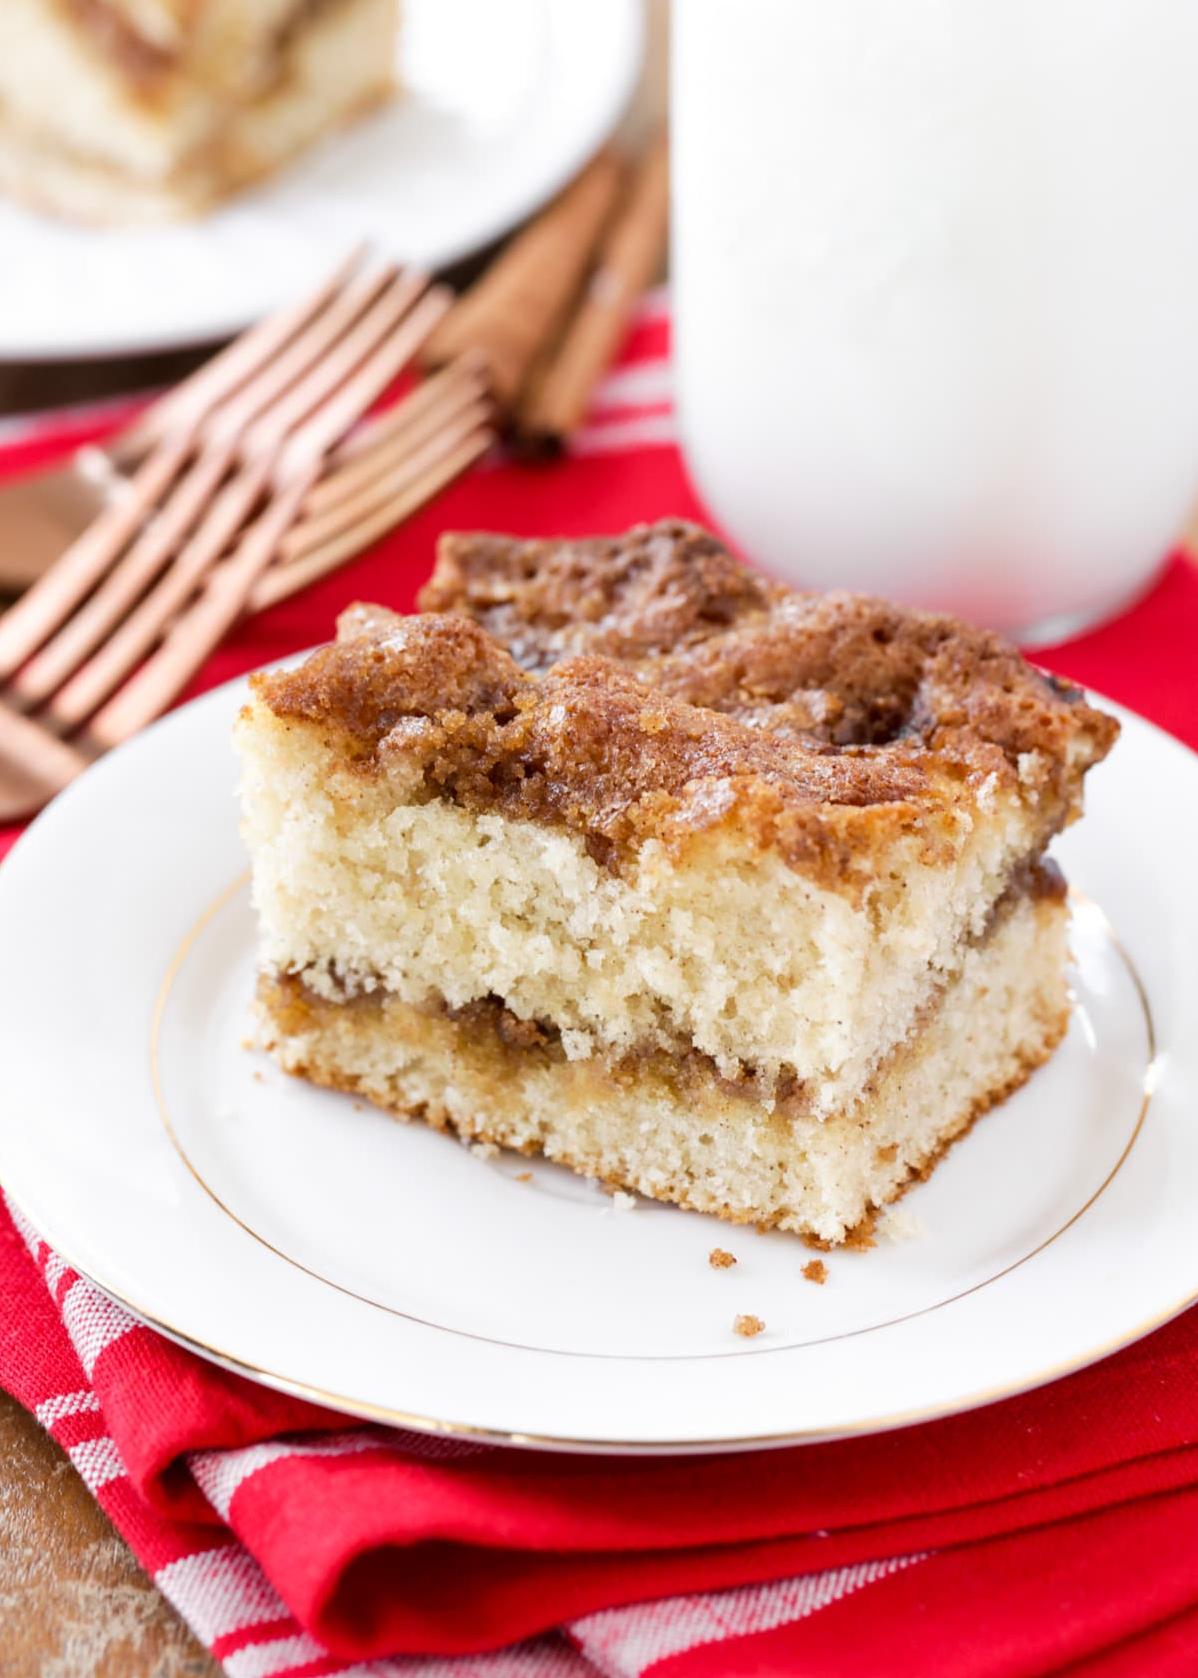  This coffee cake is absolutely irresistible – perfect for breakfast, brunch or dessert.